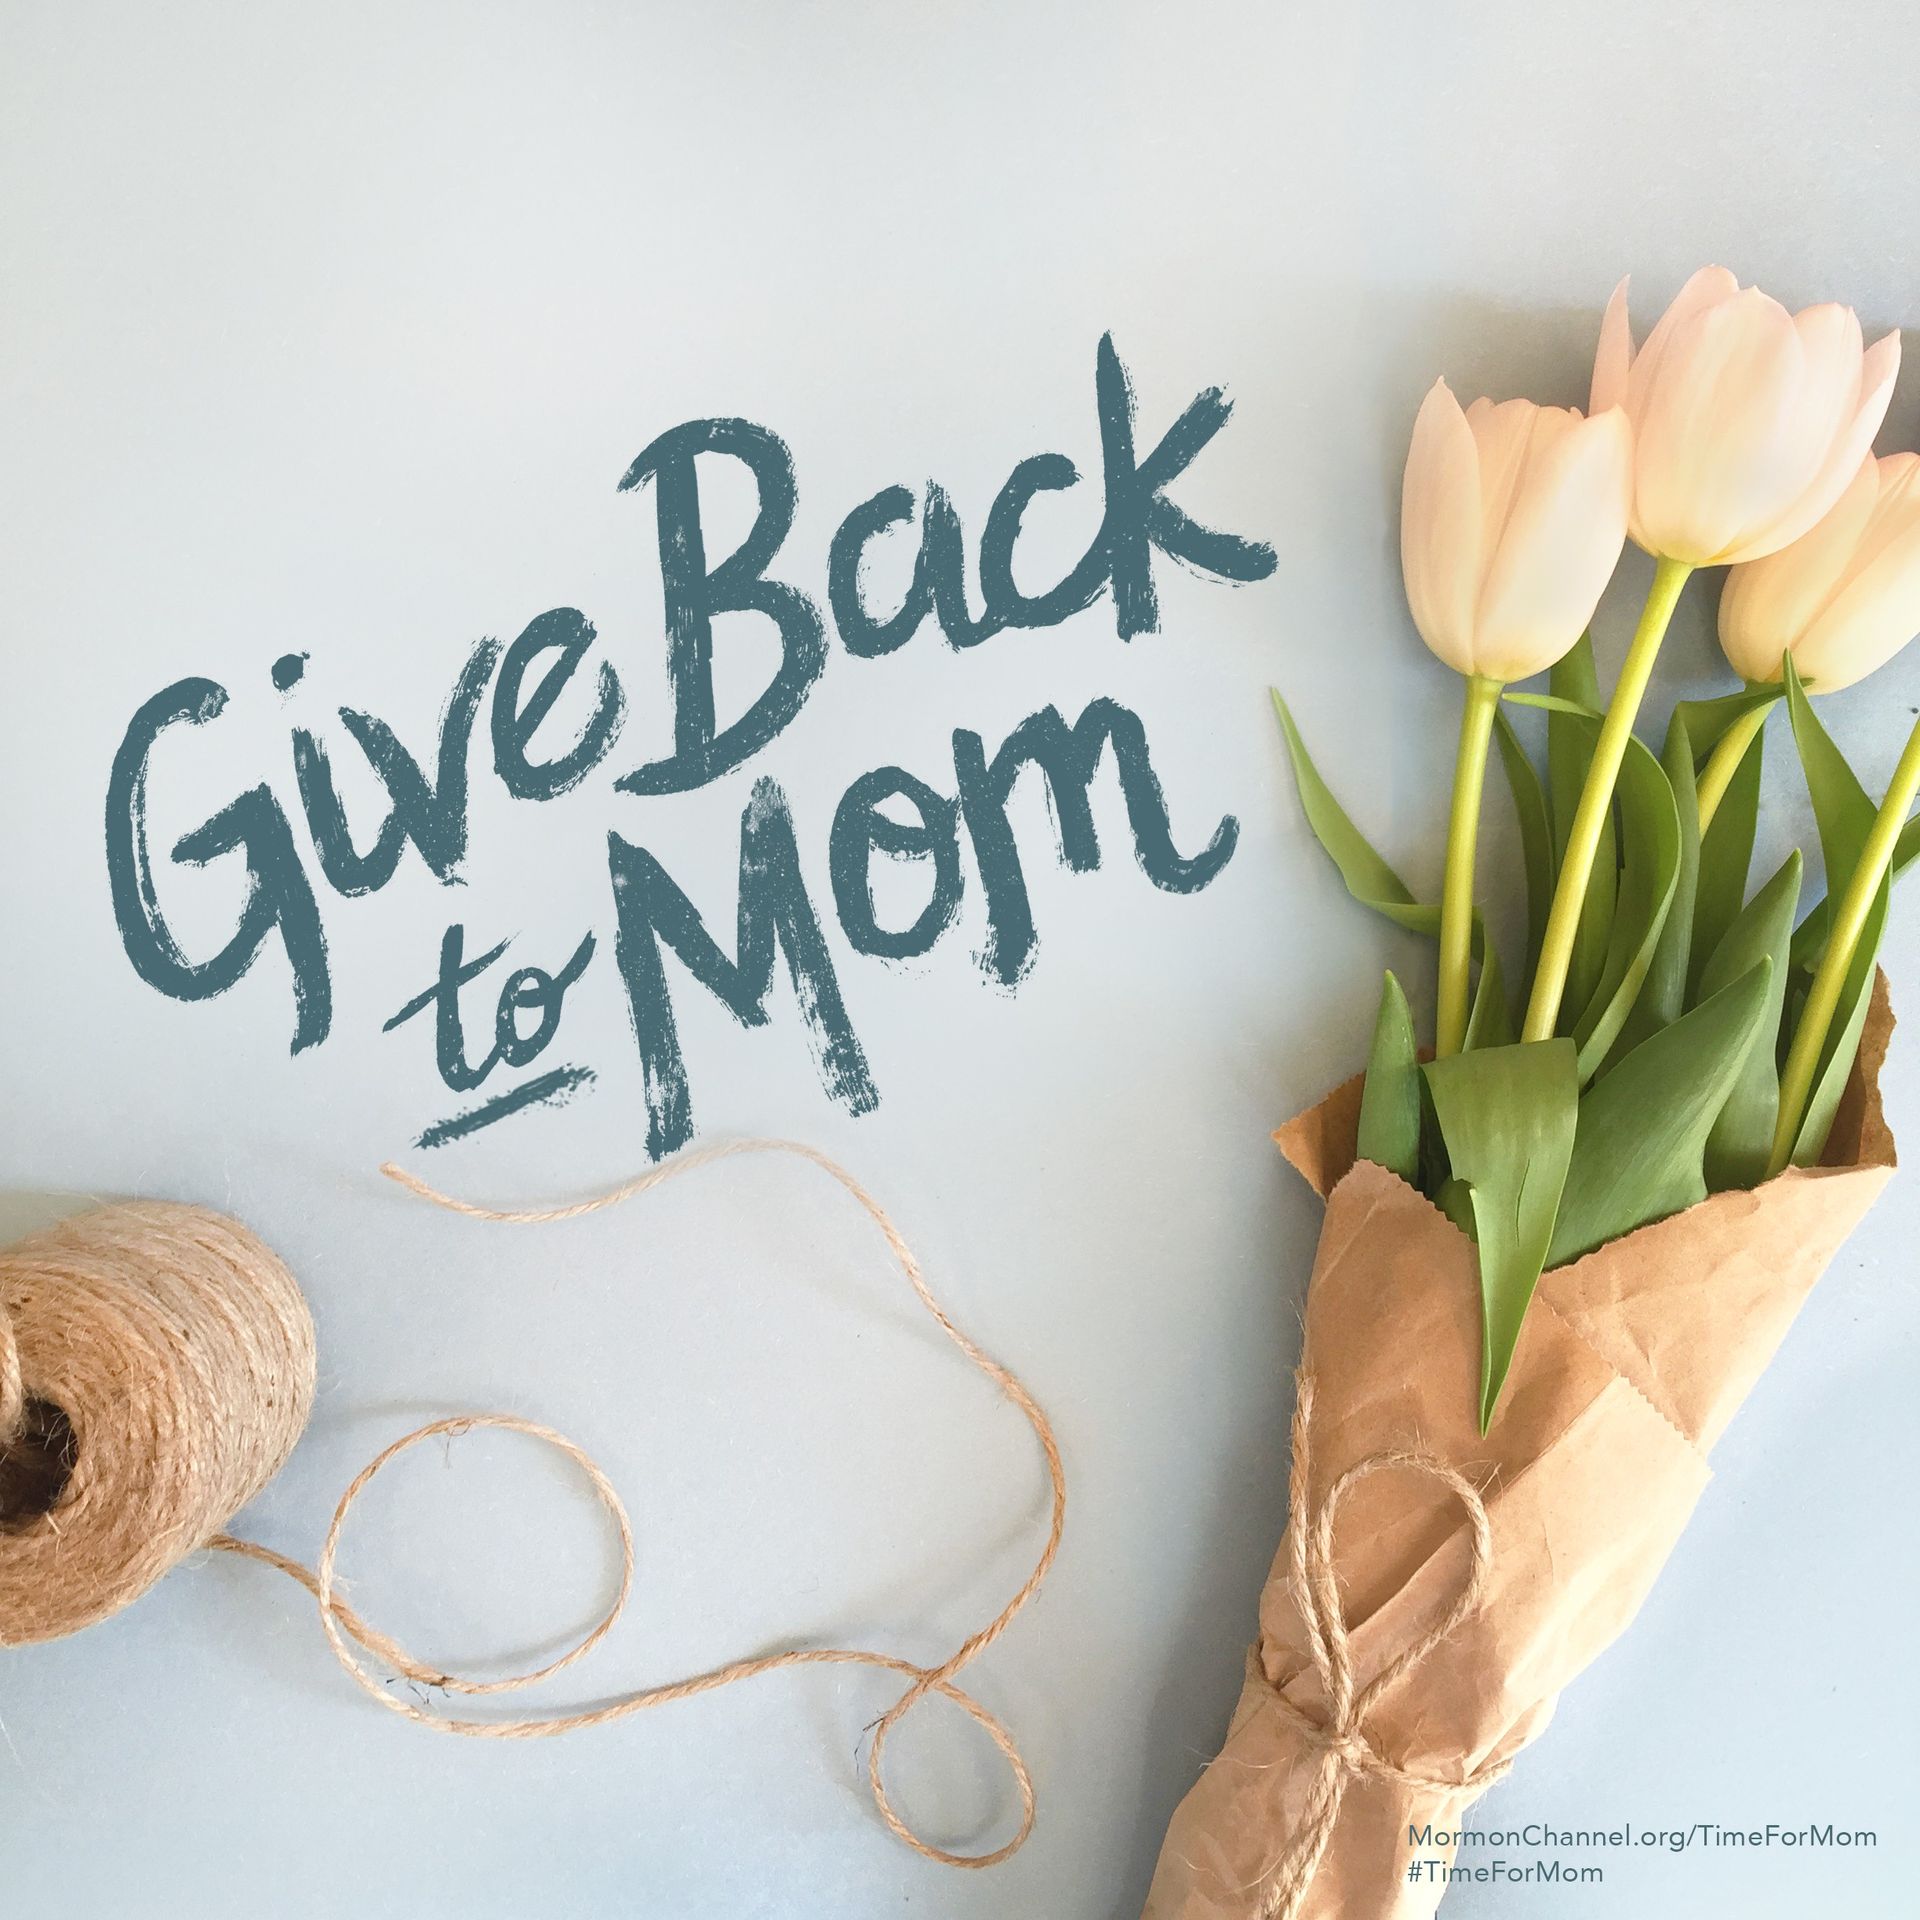 Give back to Mom. Find out how to make #TimeForMom here.